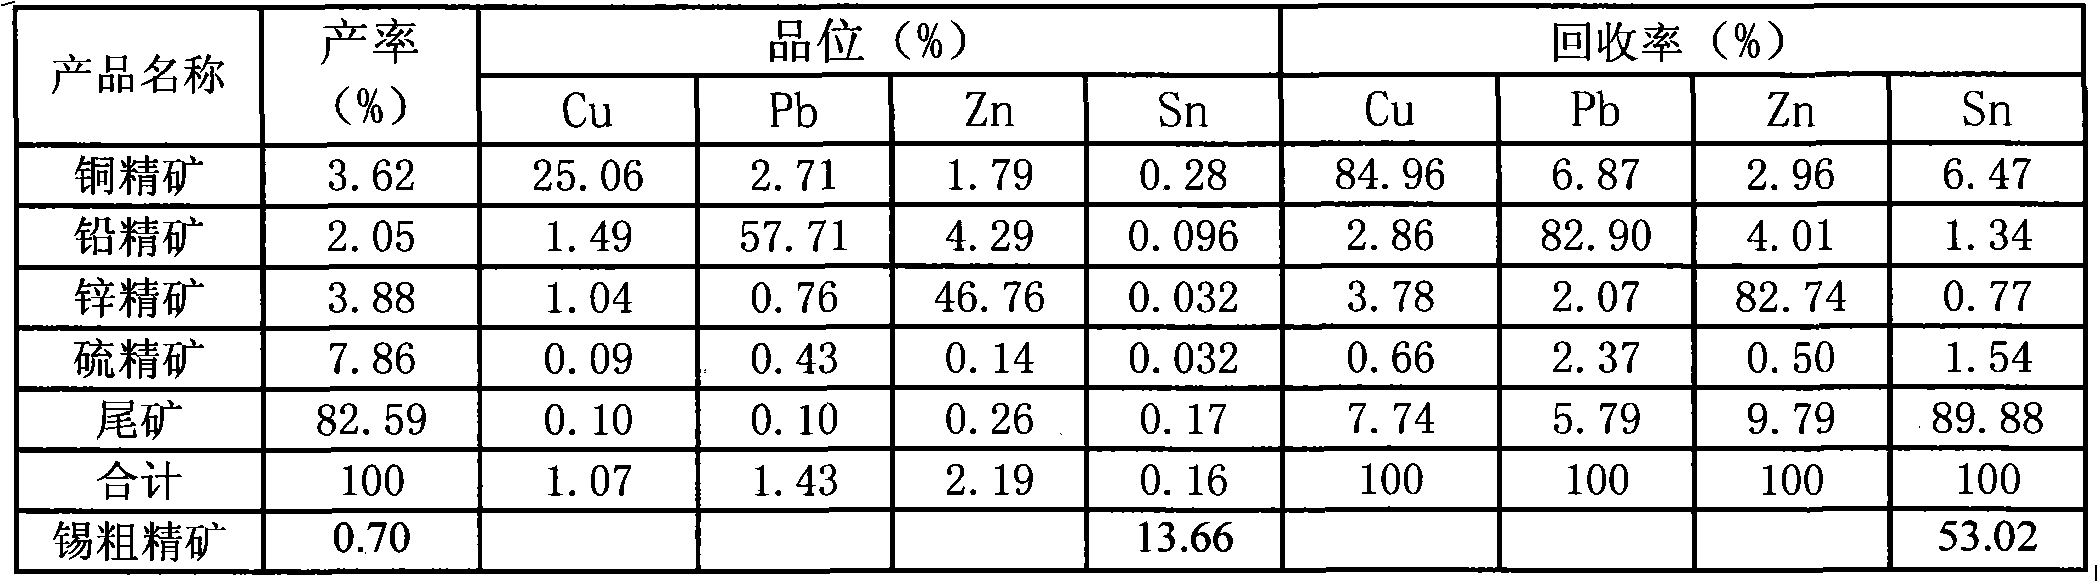 Benification combined method of polymetallic sulphide ore containing copper, lead, zinc and tin